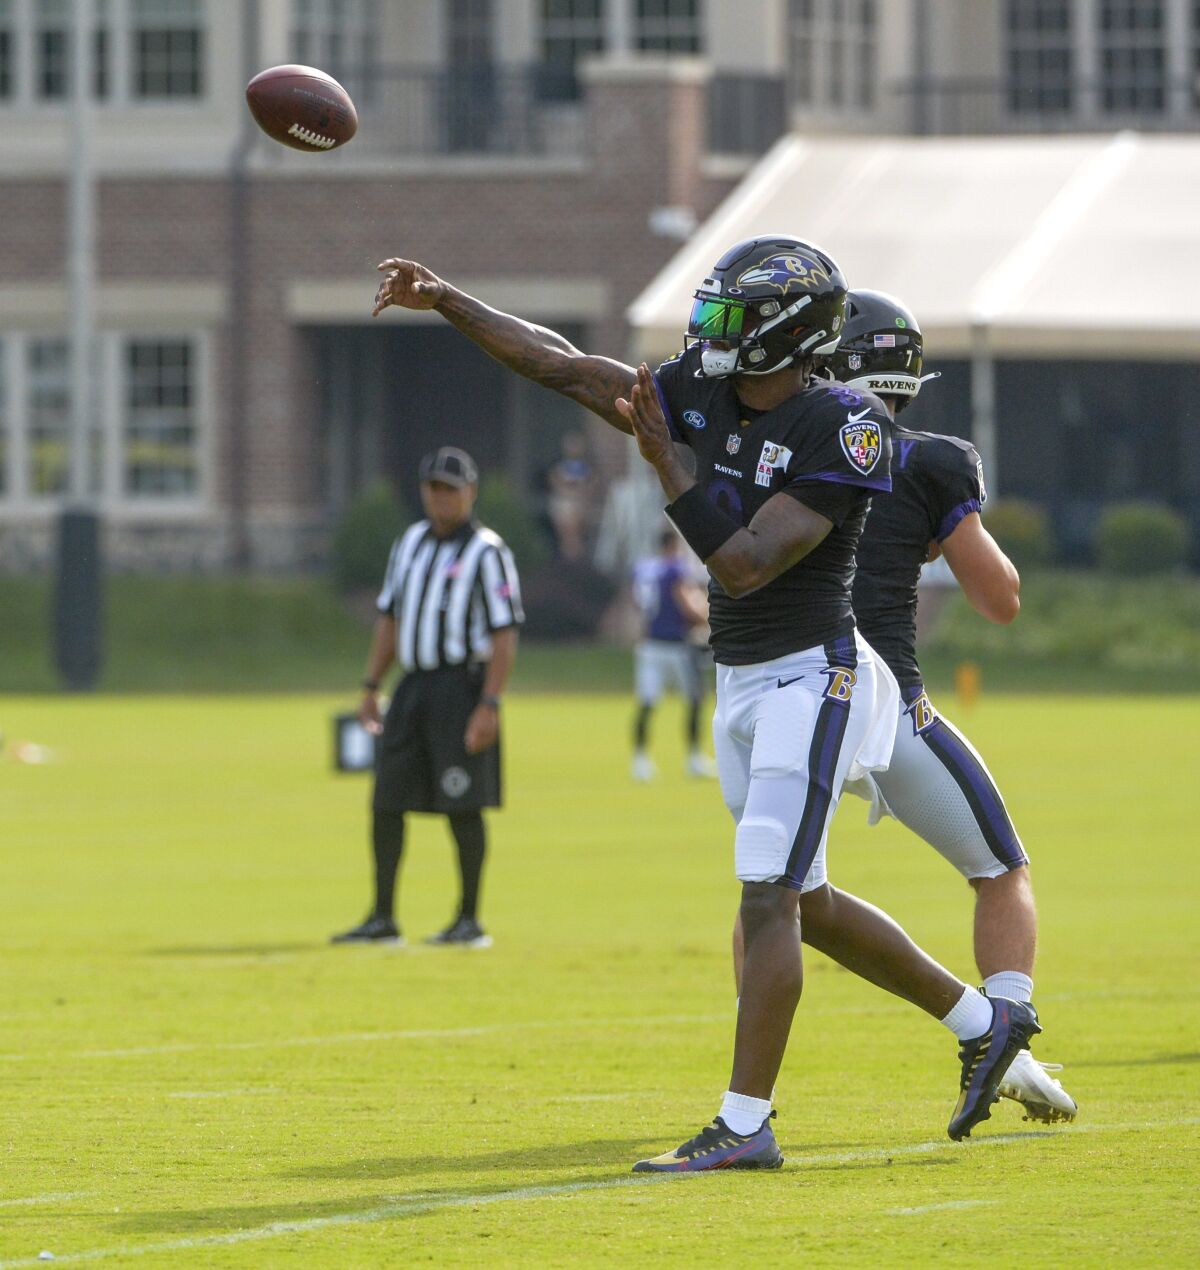 Baltimore Ravens quarterback Lamar Jackson returns to football practice after missing 10-days due to COVID-19. He completes a pass during training camp at Under Armour Performance Center on Aug. 7, 2021 in Owings Mills, Md. (Kevin Richardson/The Baltimore Sun via AP)